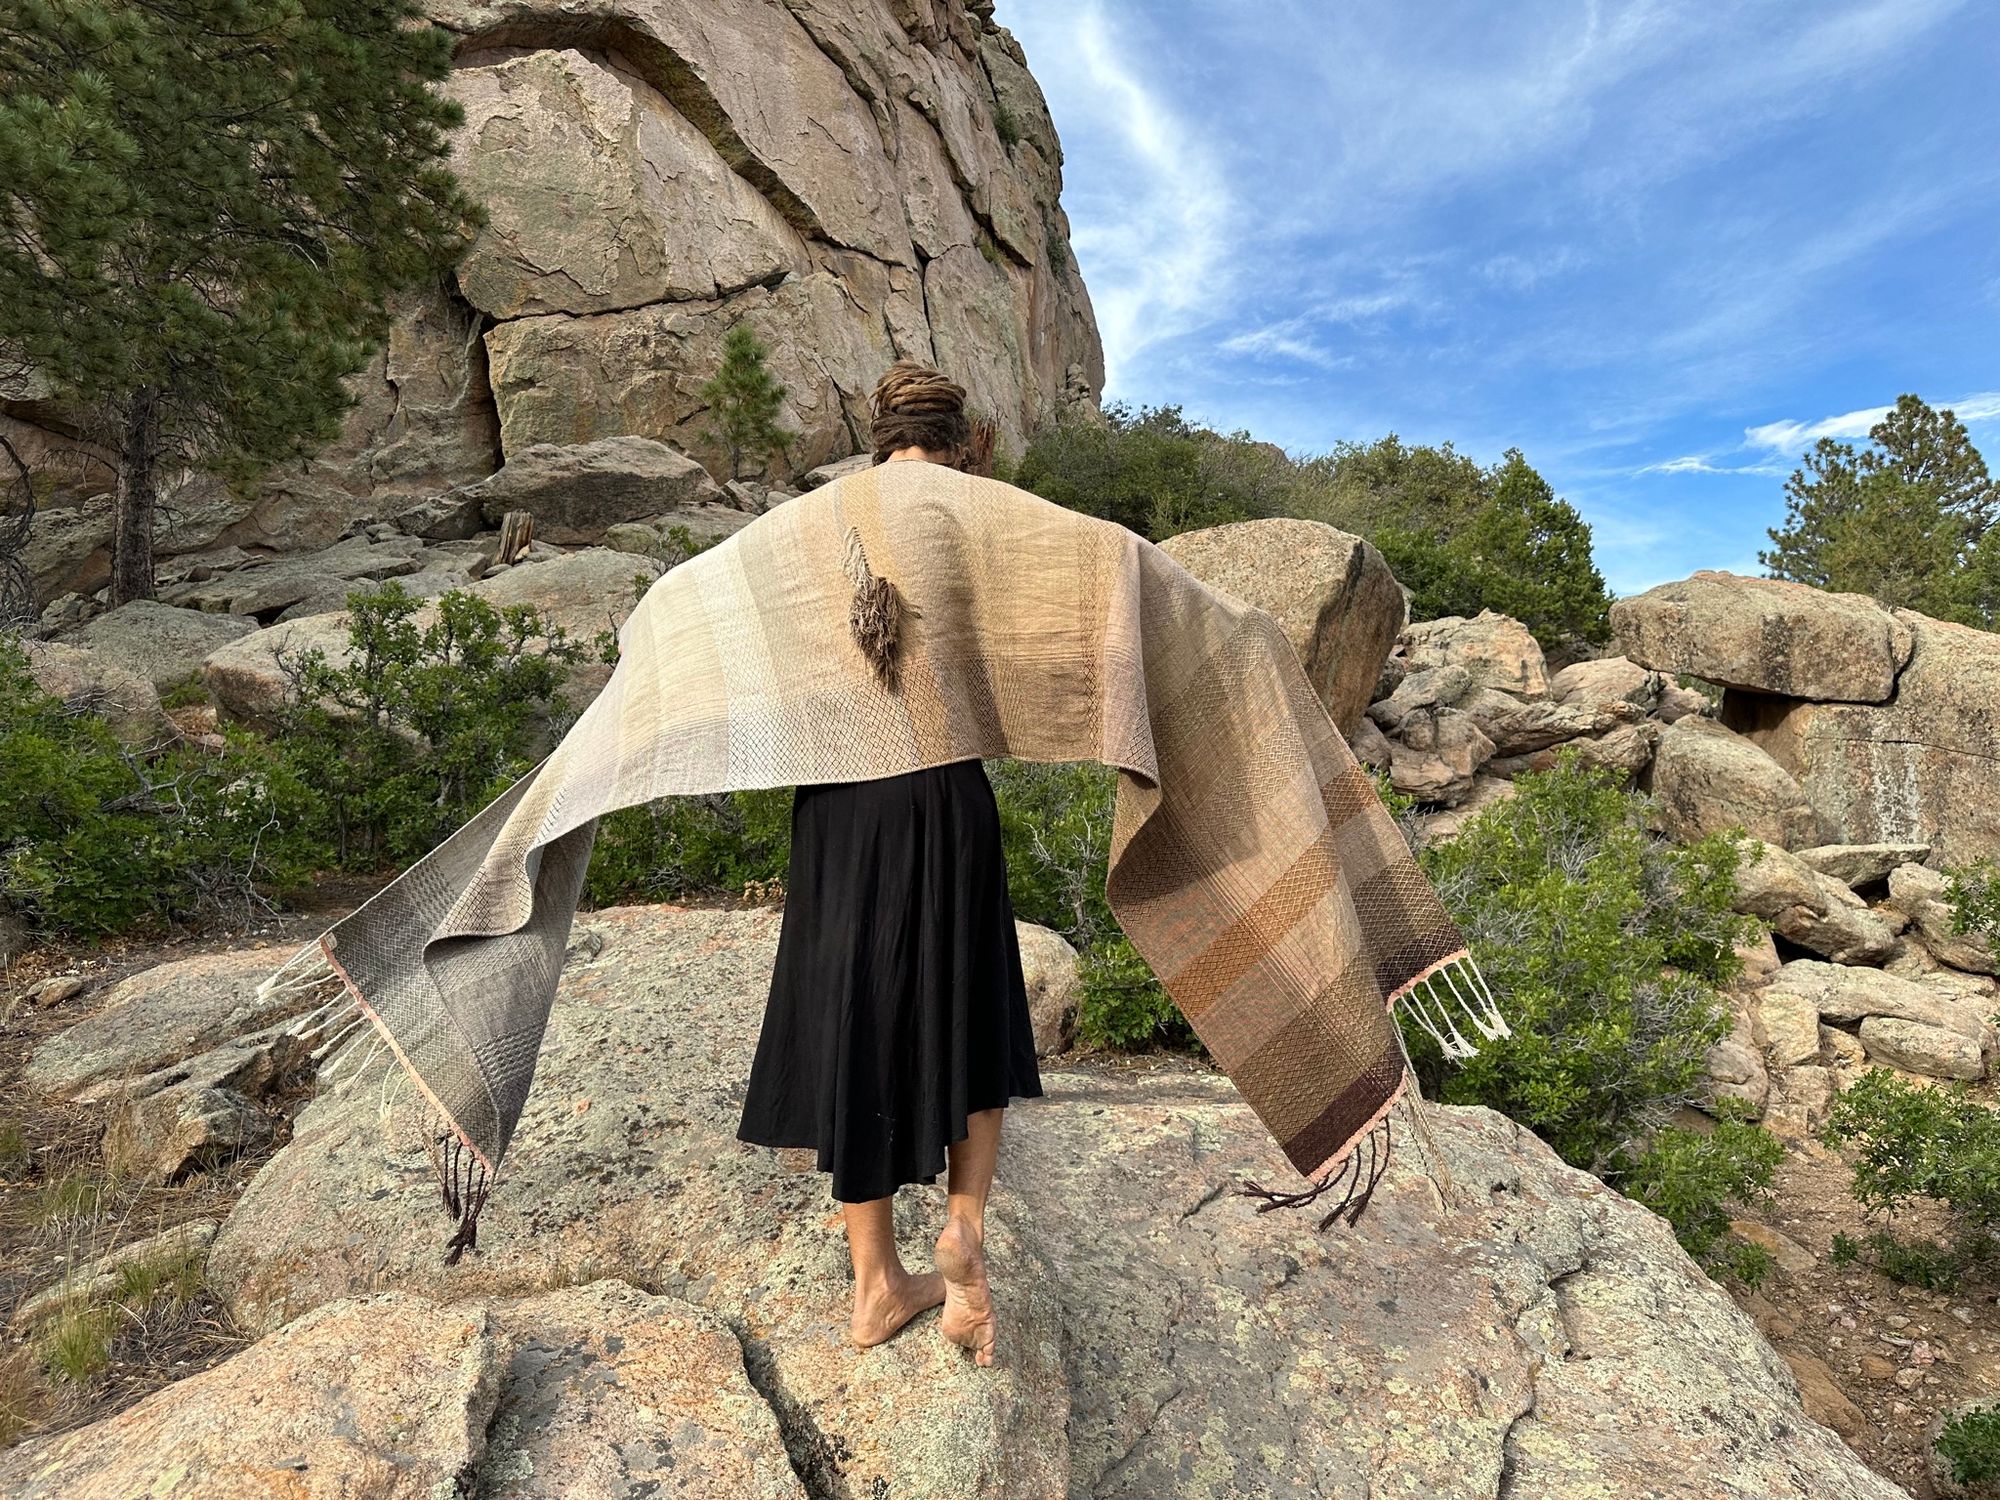 A woman in a black dress stands on large rocks wearing a handwoven naturally dyed grey, brown and white shawl